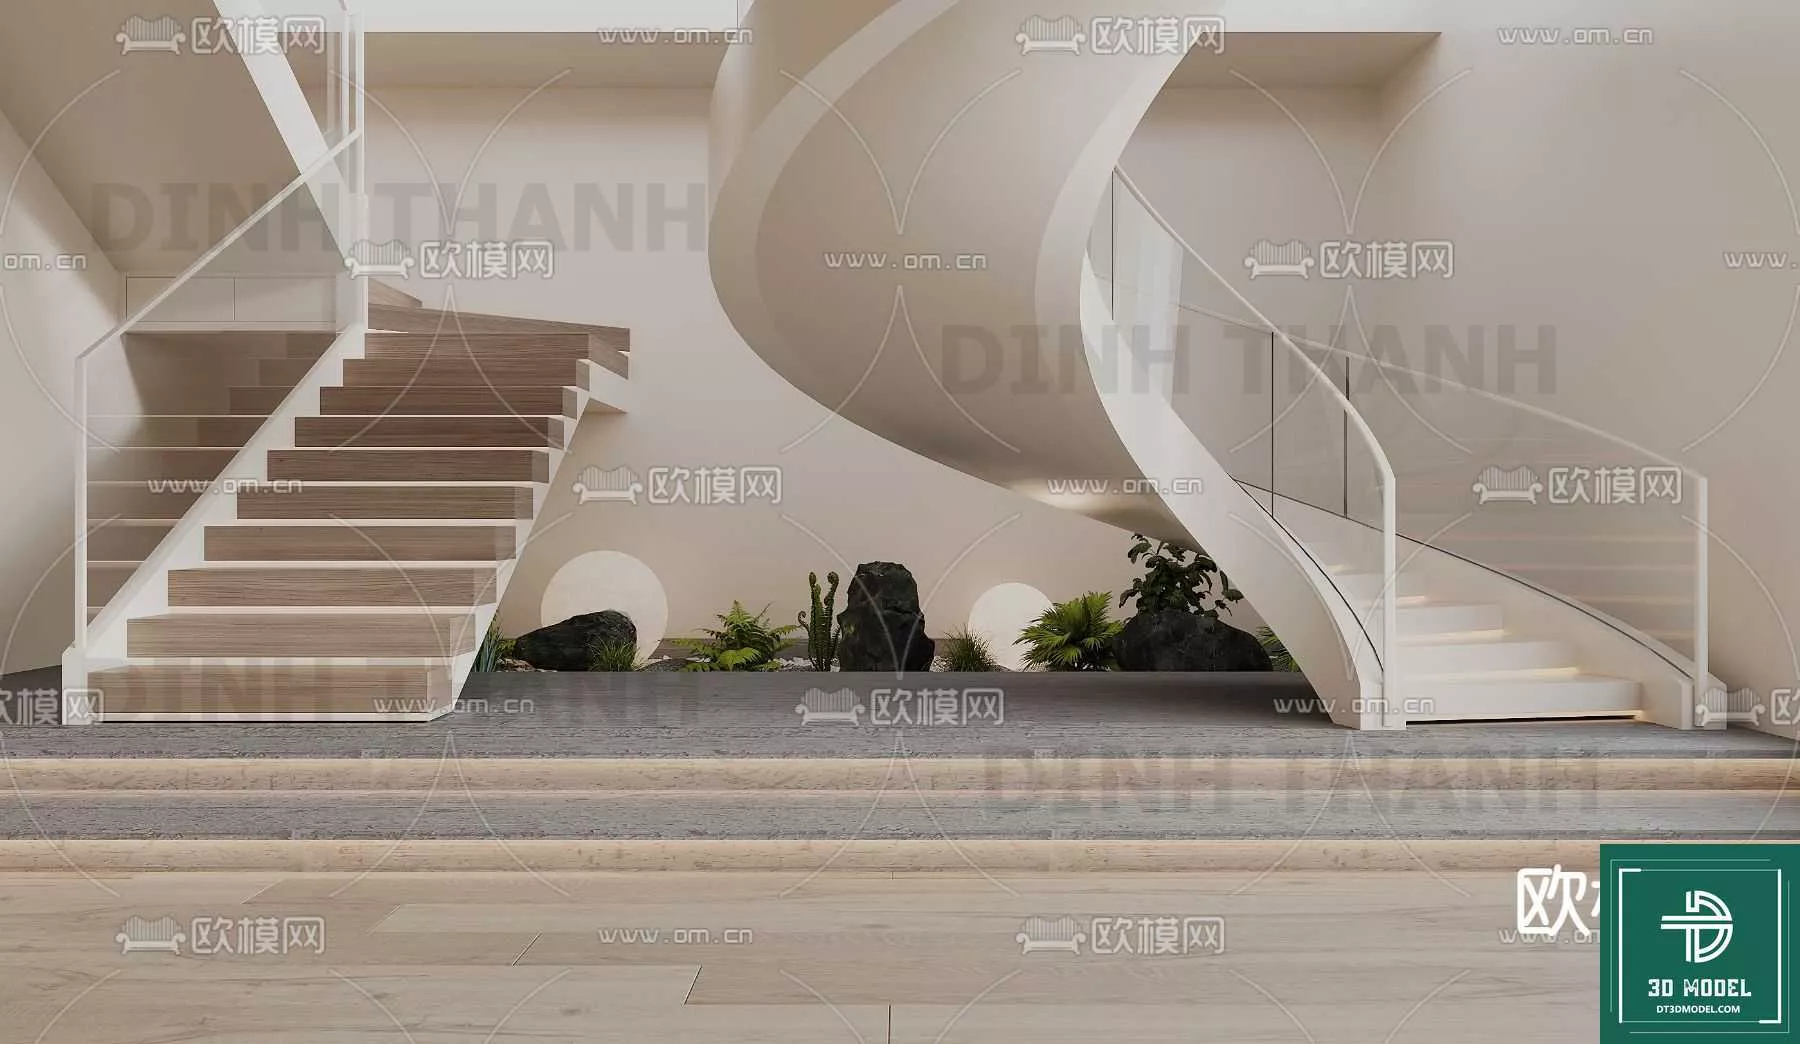 MODERN STAIR - SKETCHUP 3D MODEL - VRAY OR ENSCAPE - ID14225